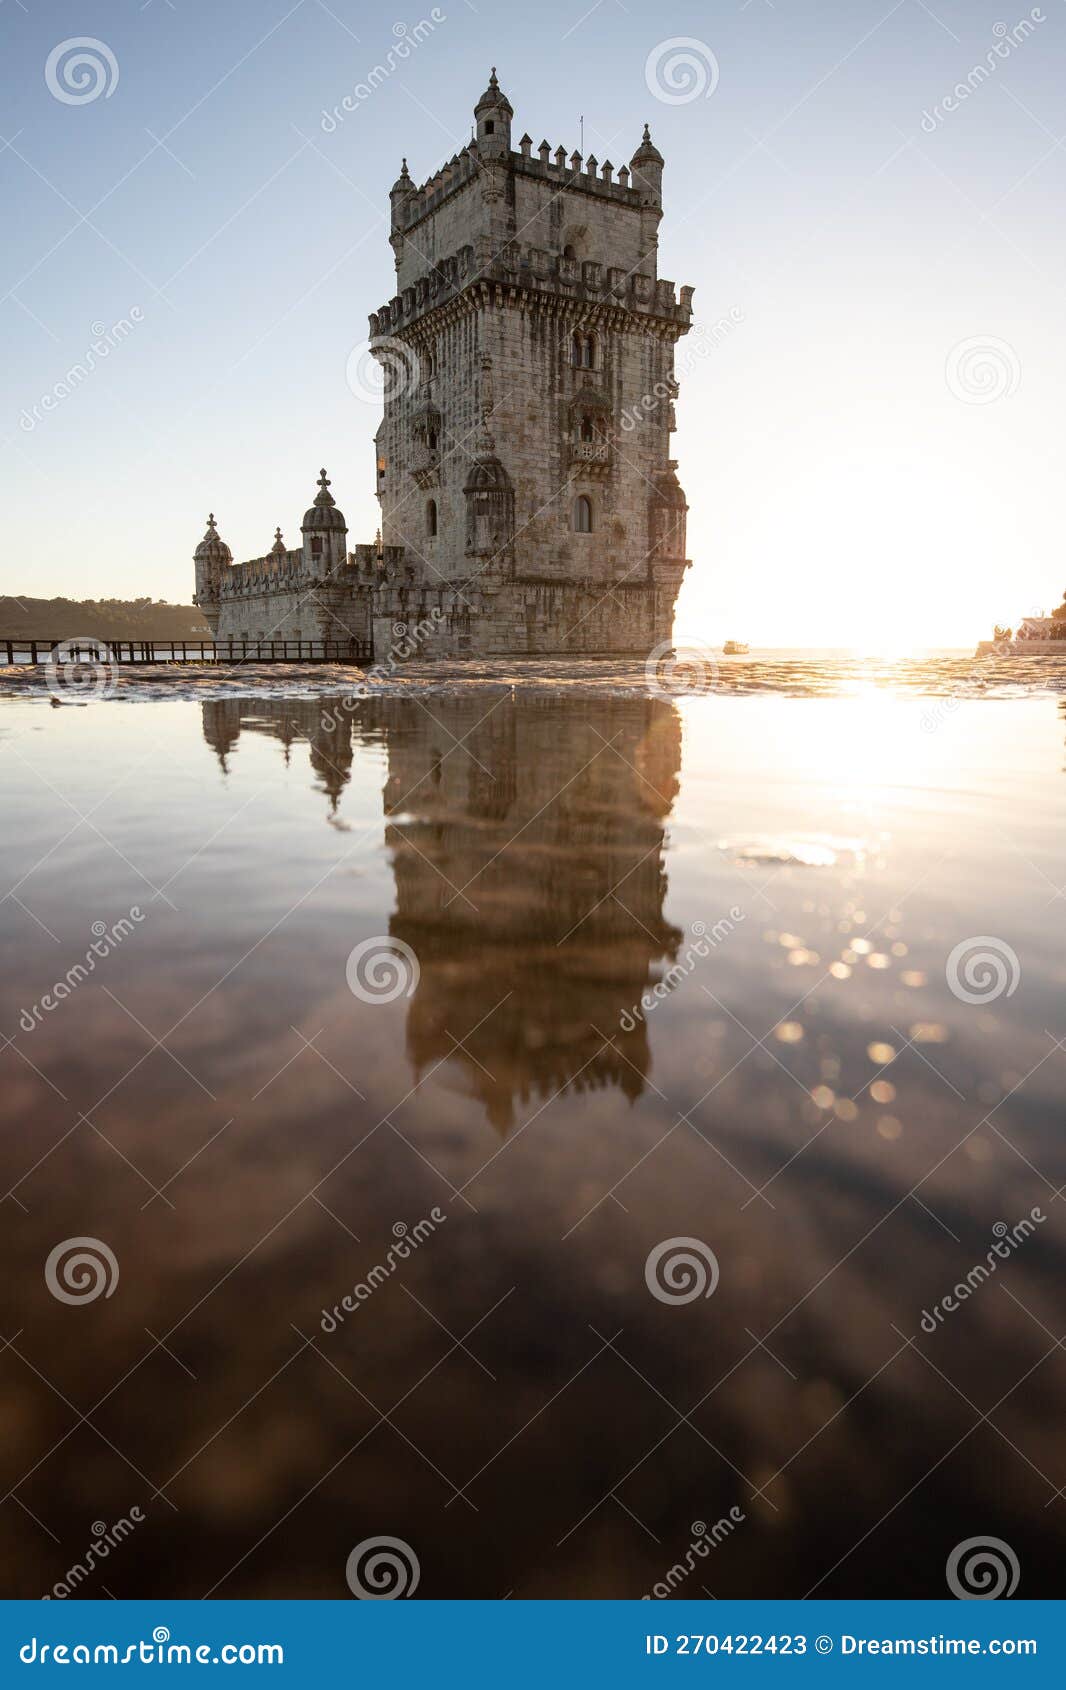 torre de belÃ©m on the banks of the tagus, historic watchtower in the sunset